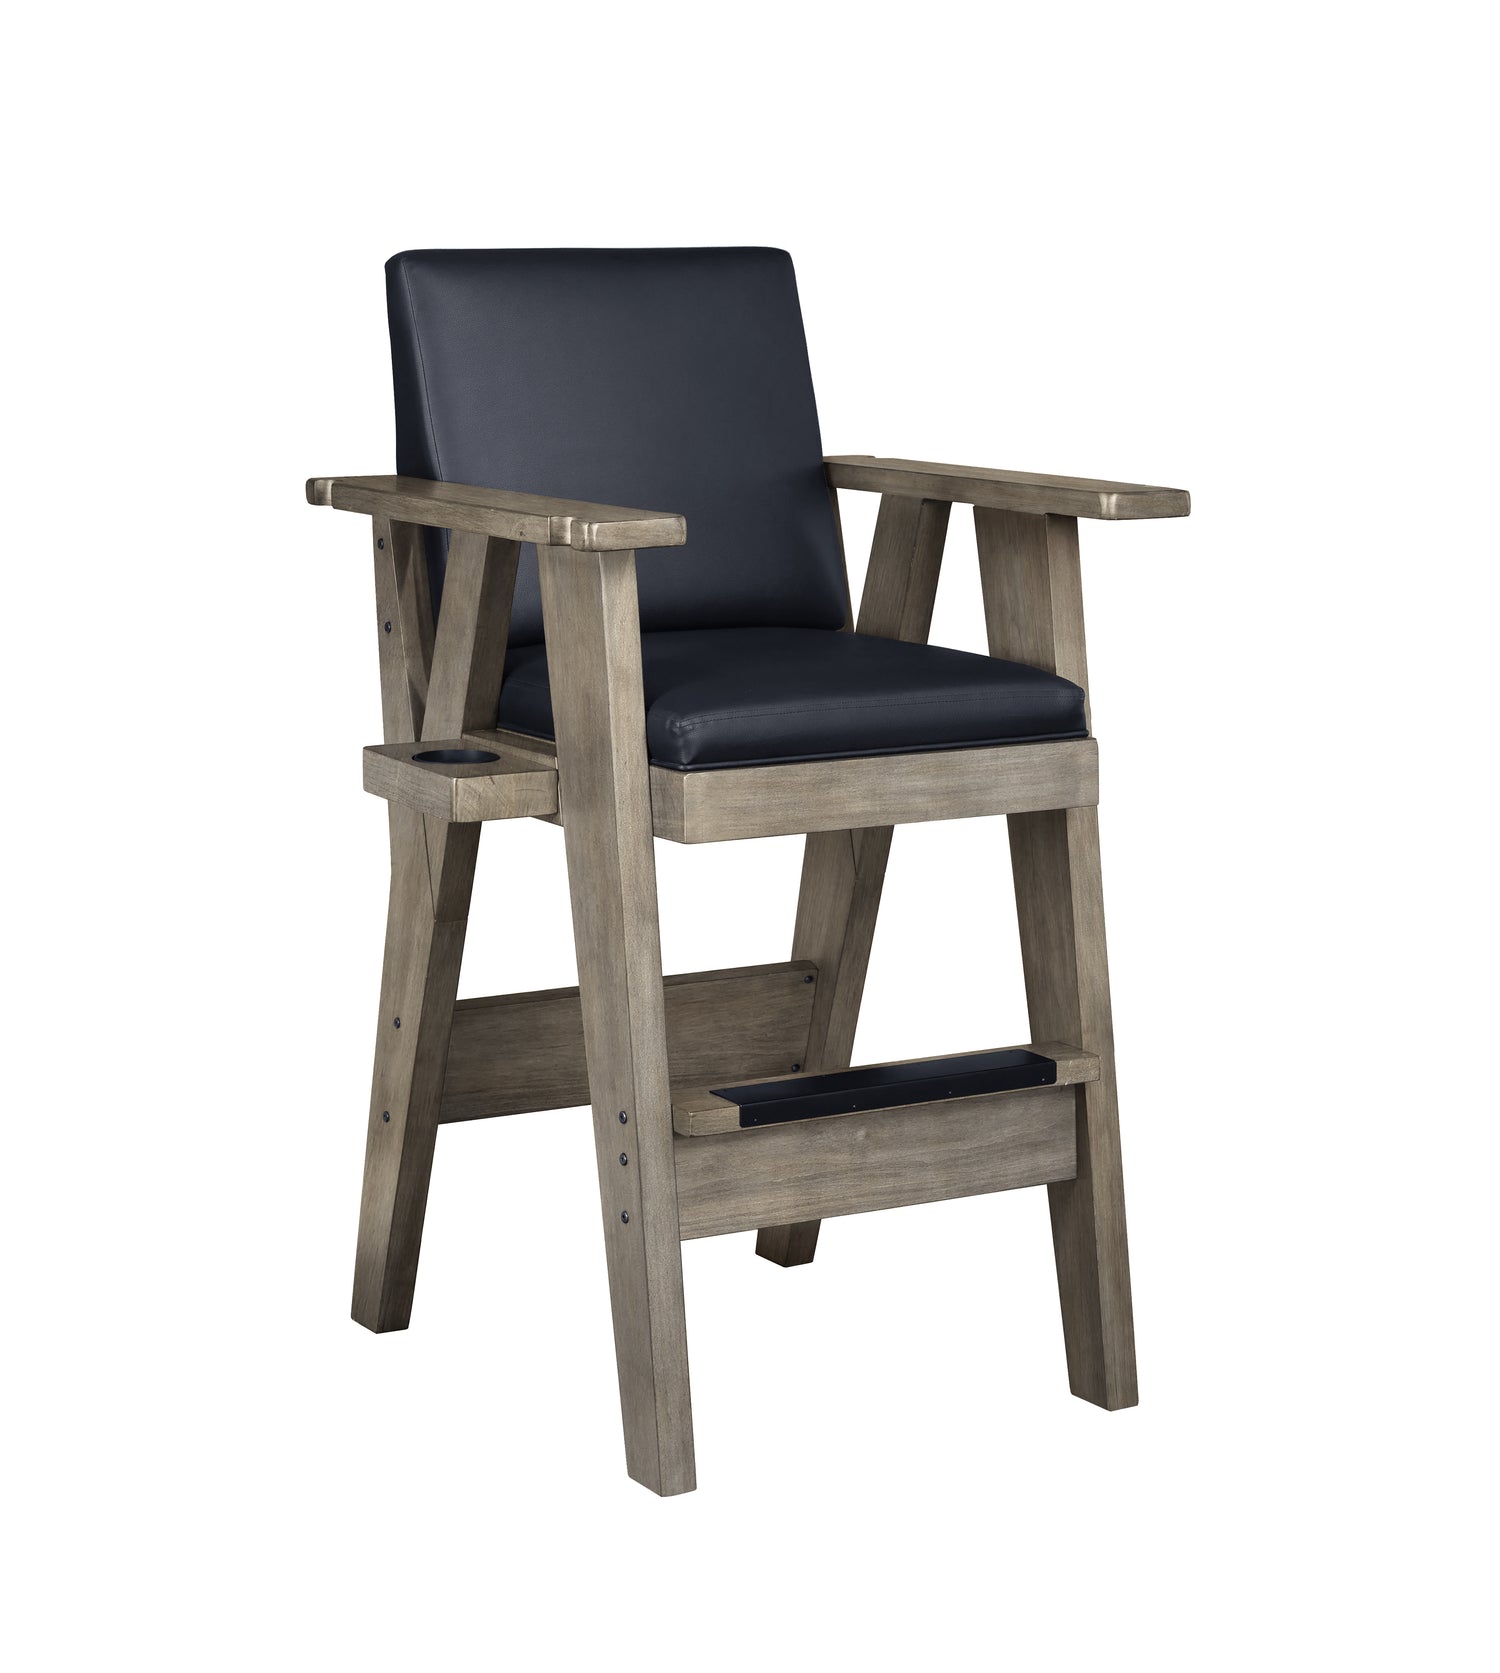 Legacy Billiards Sterling Spectator Chair in Overcast Finish - Primary Image